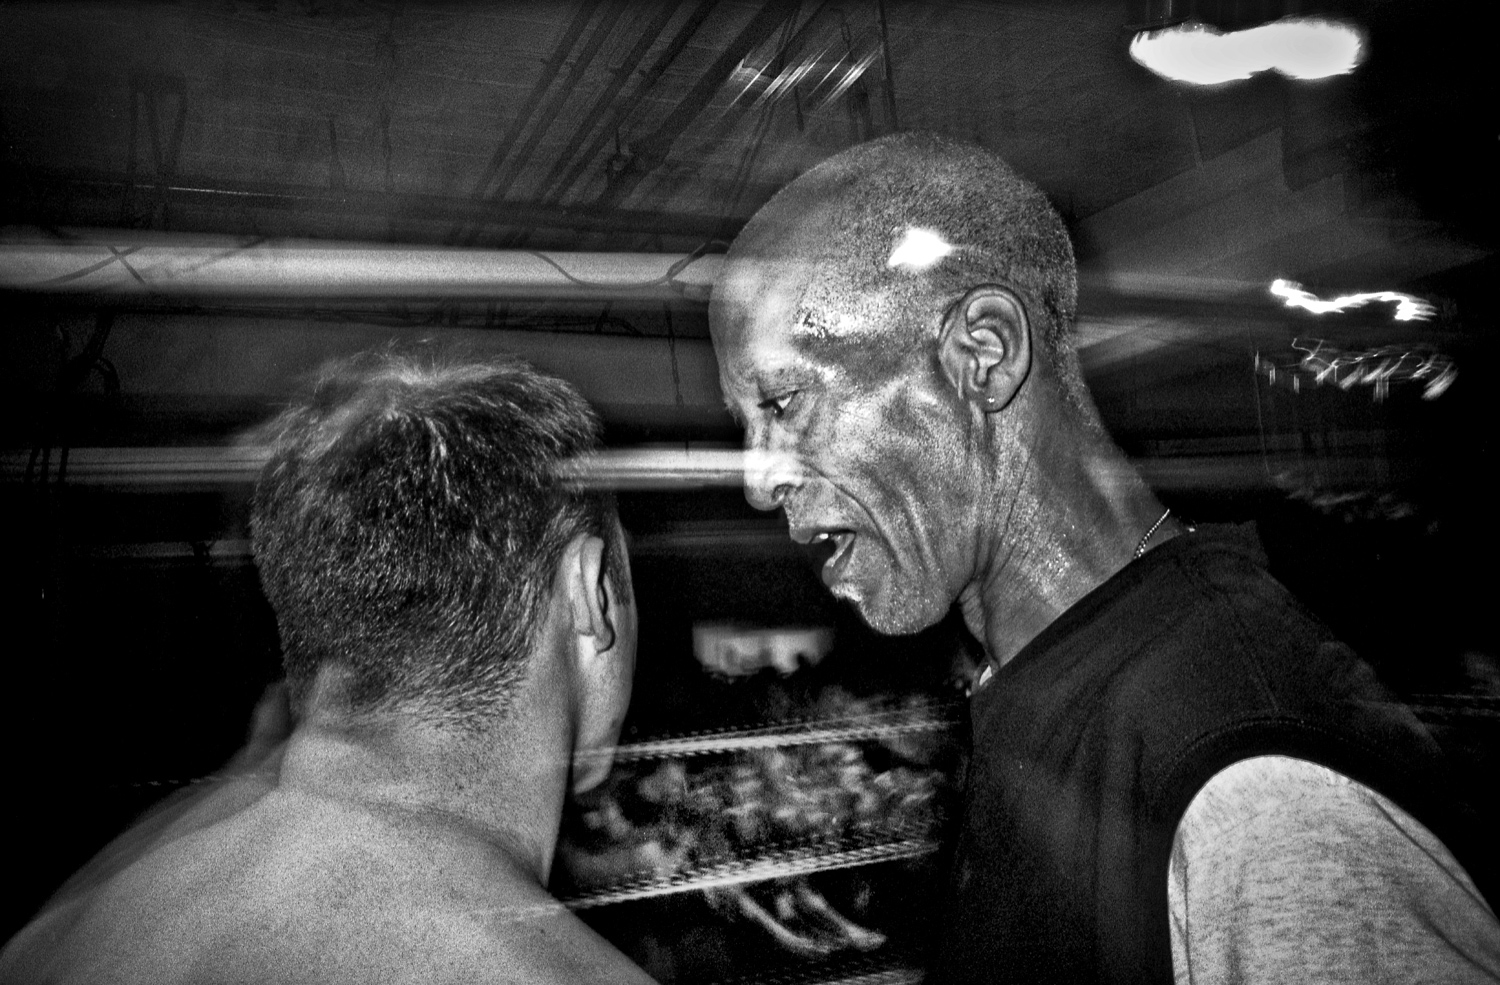 The referee speaks to one of the boxers.